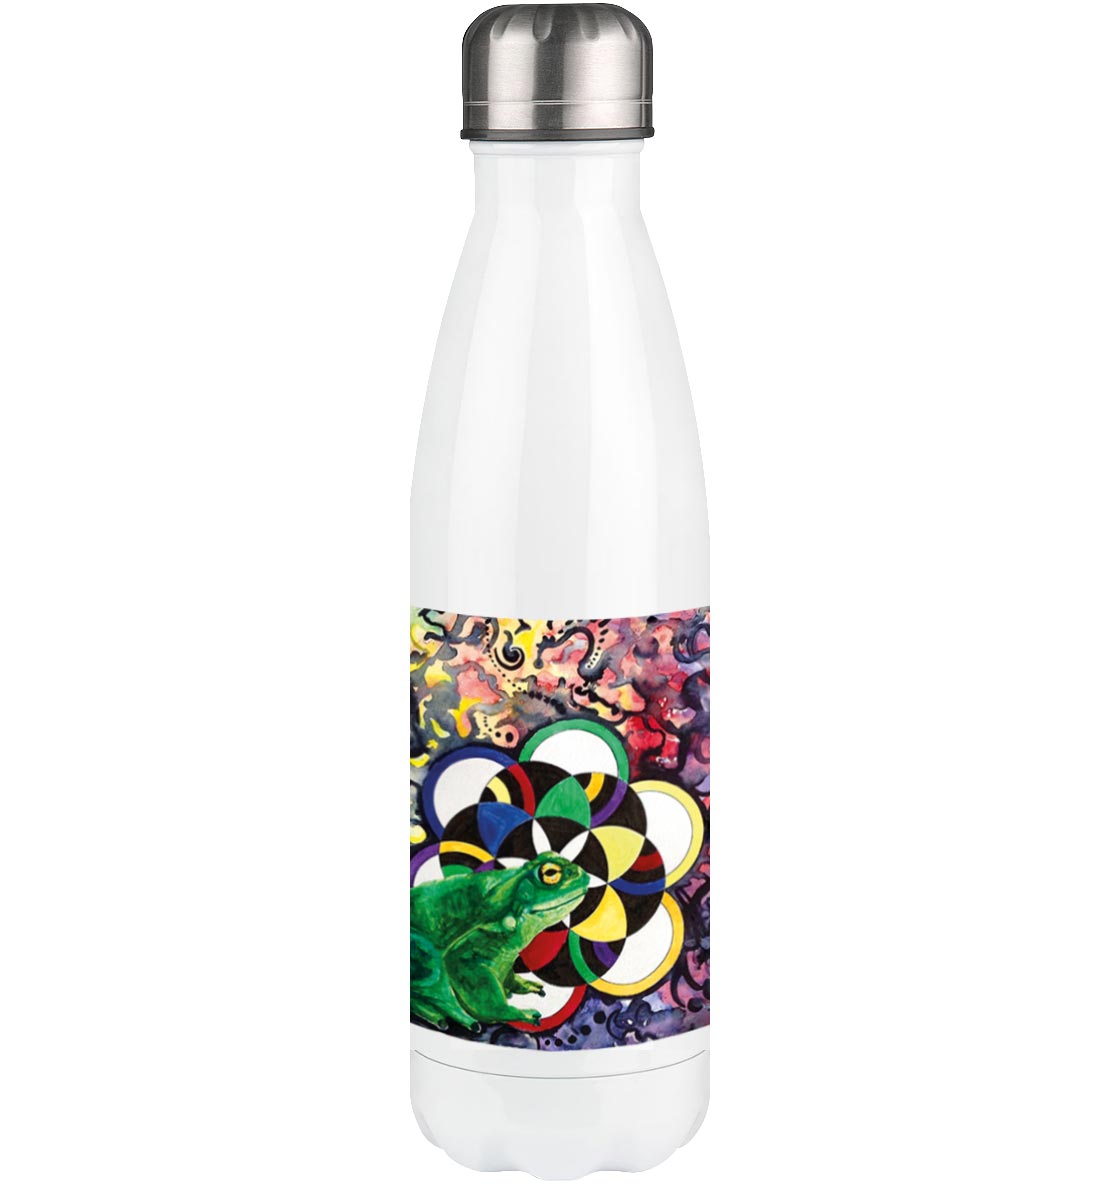 PsyToad // Thermoflasche 500ml